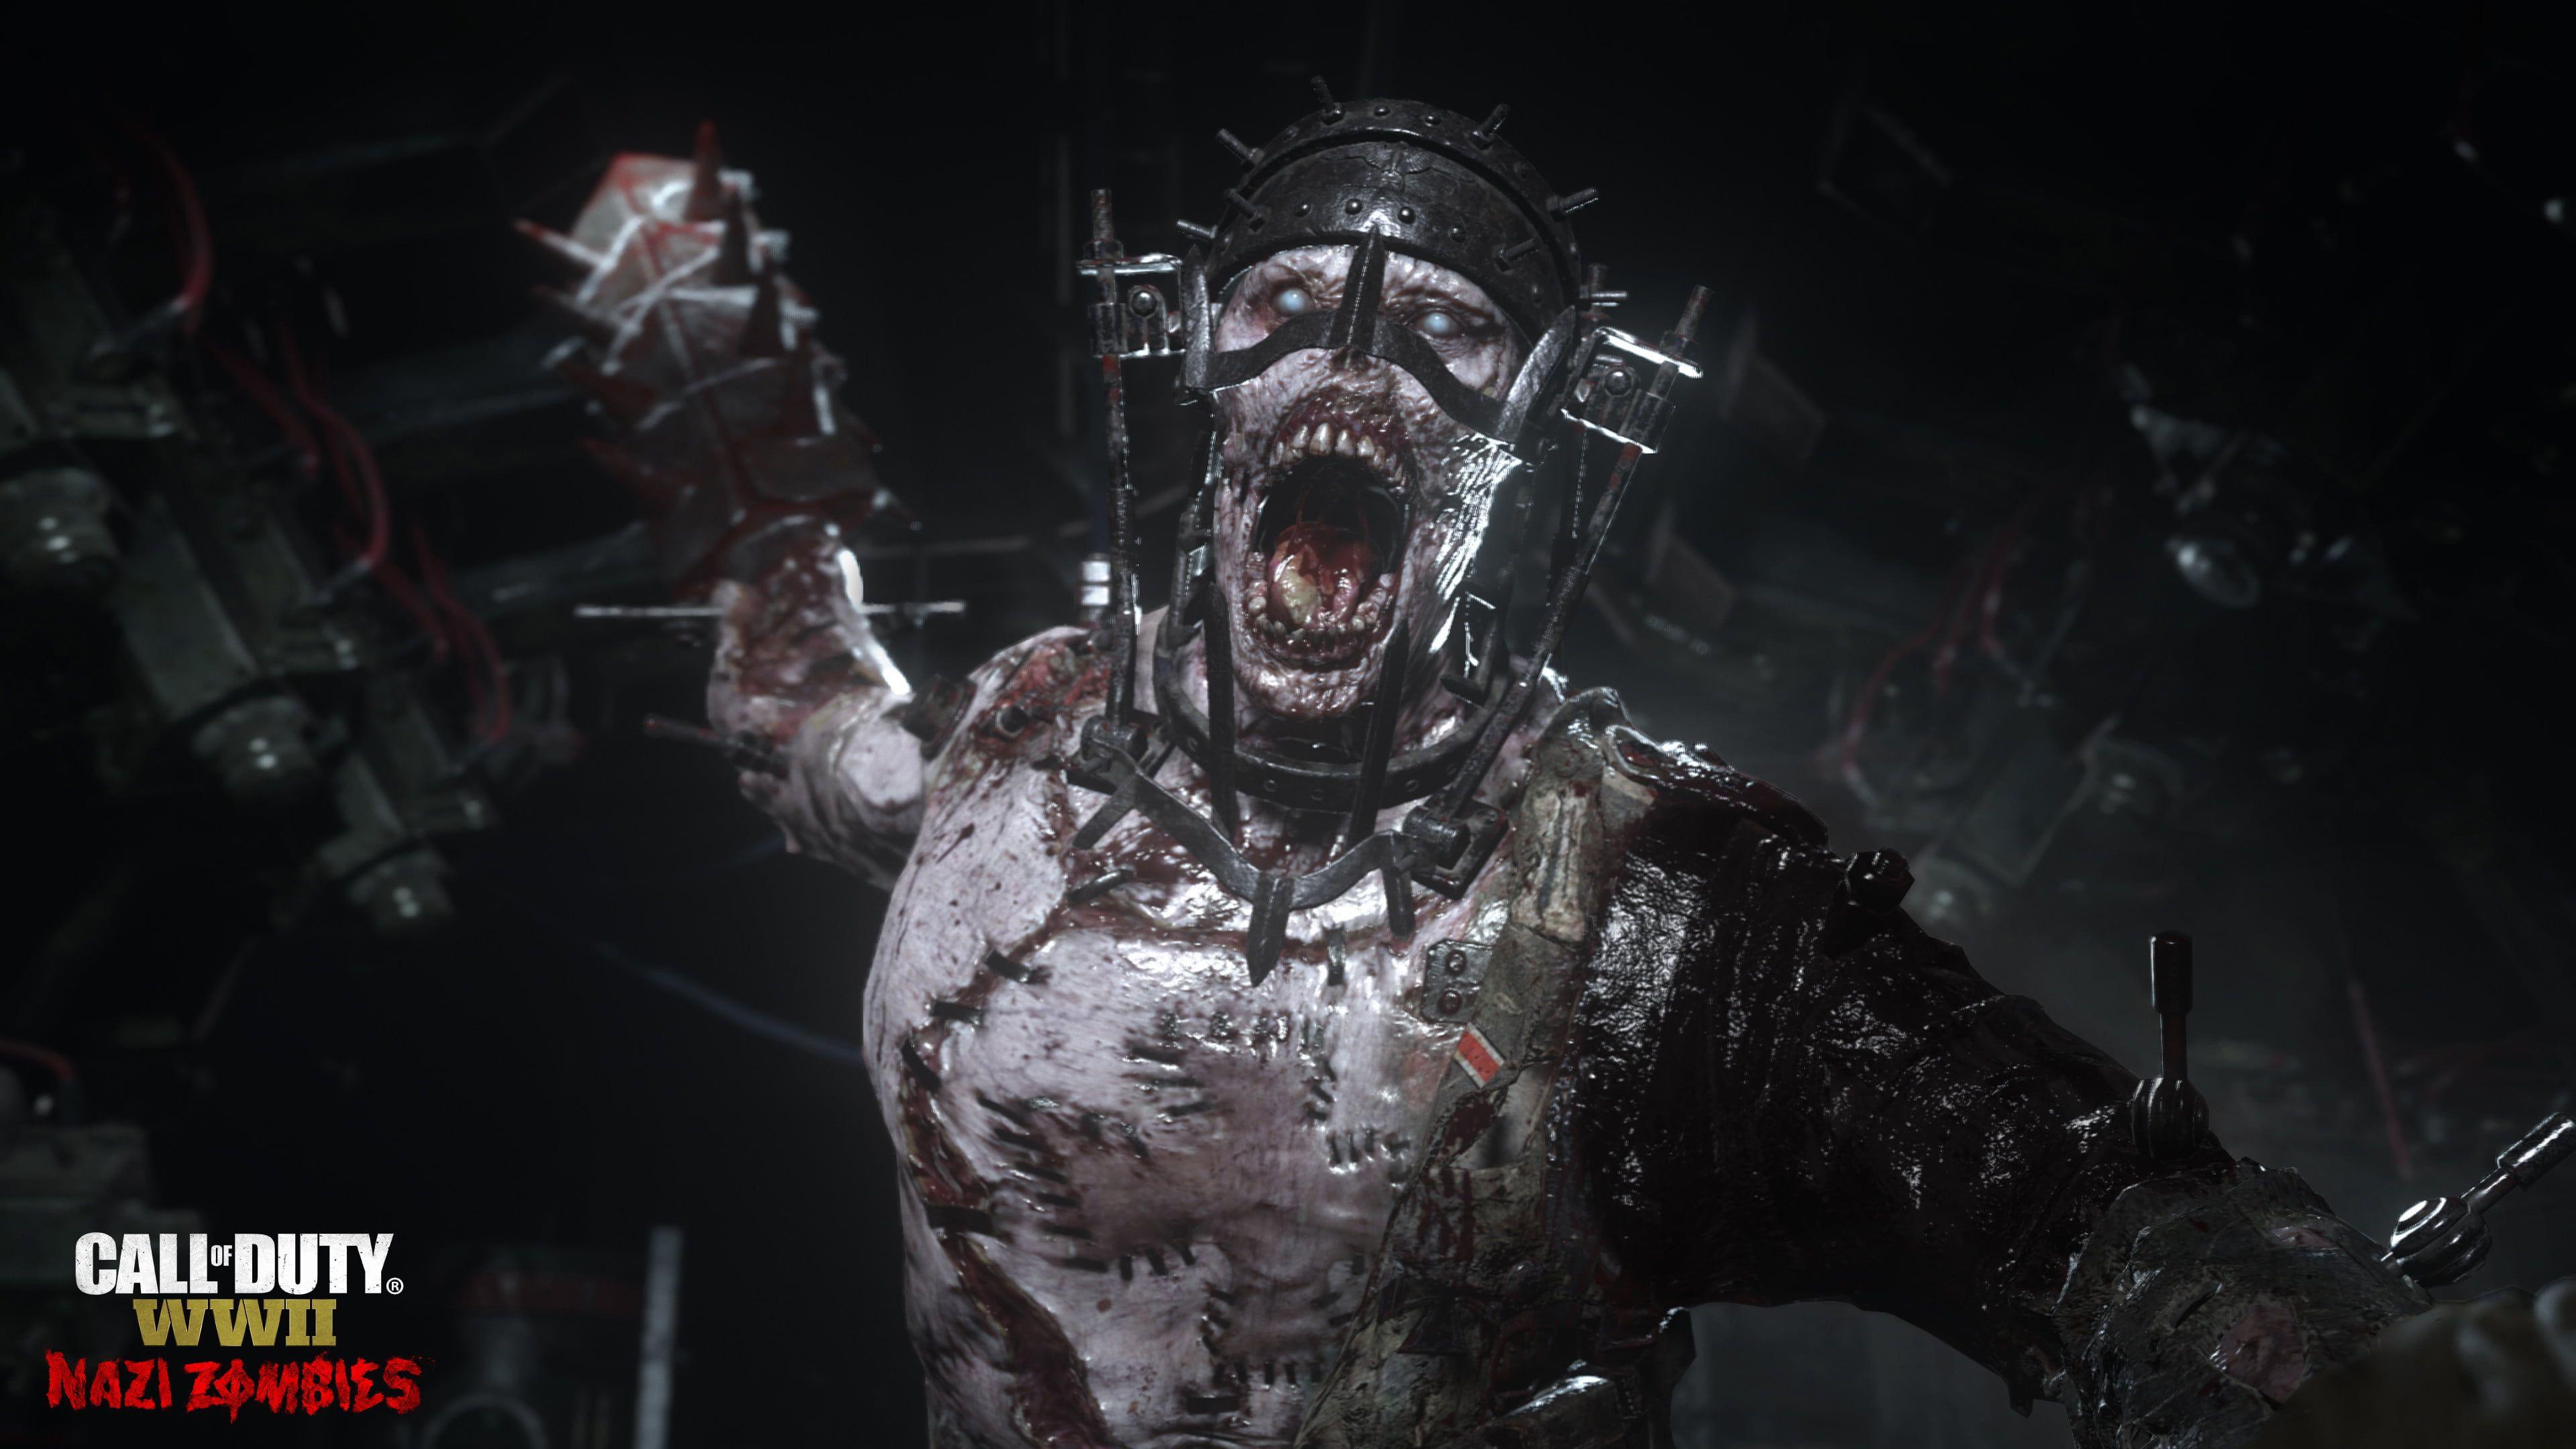 Call Of Duty WWII Nazi Zombies. Games HD 4k Wallpaper